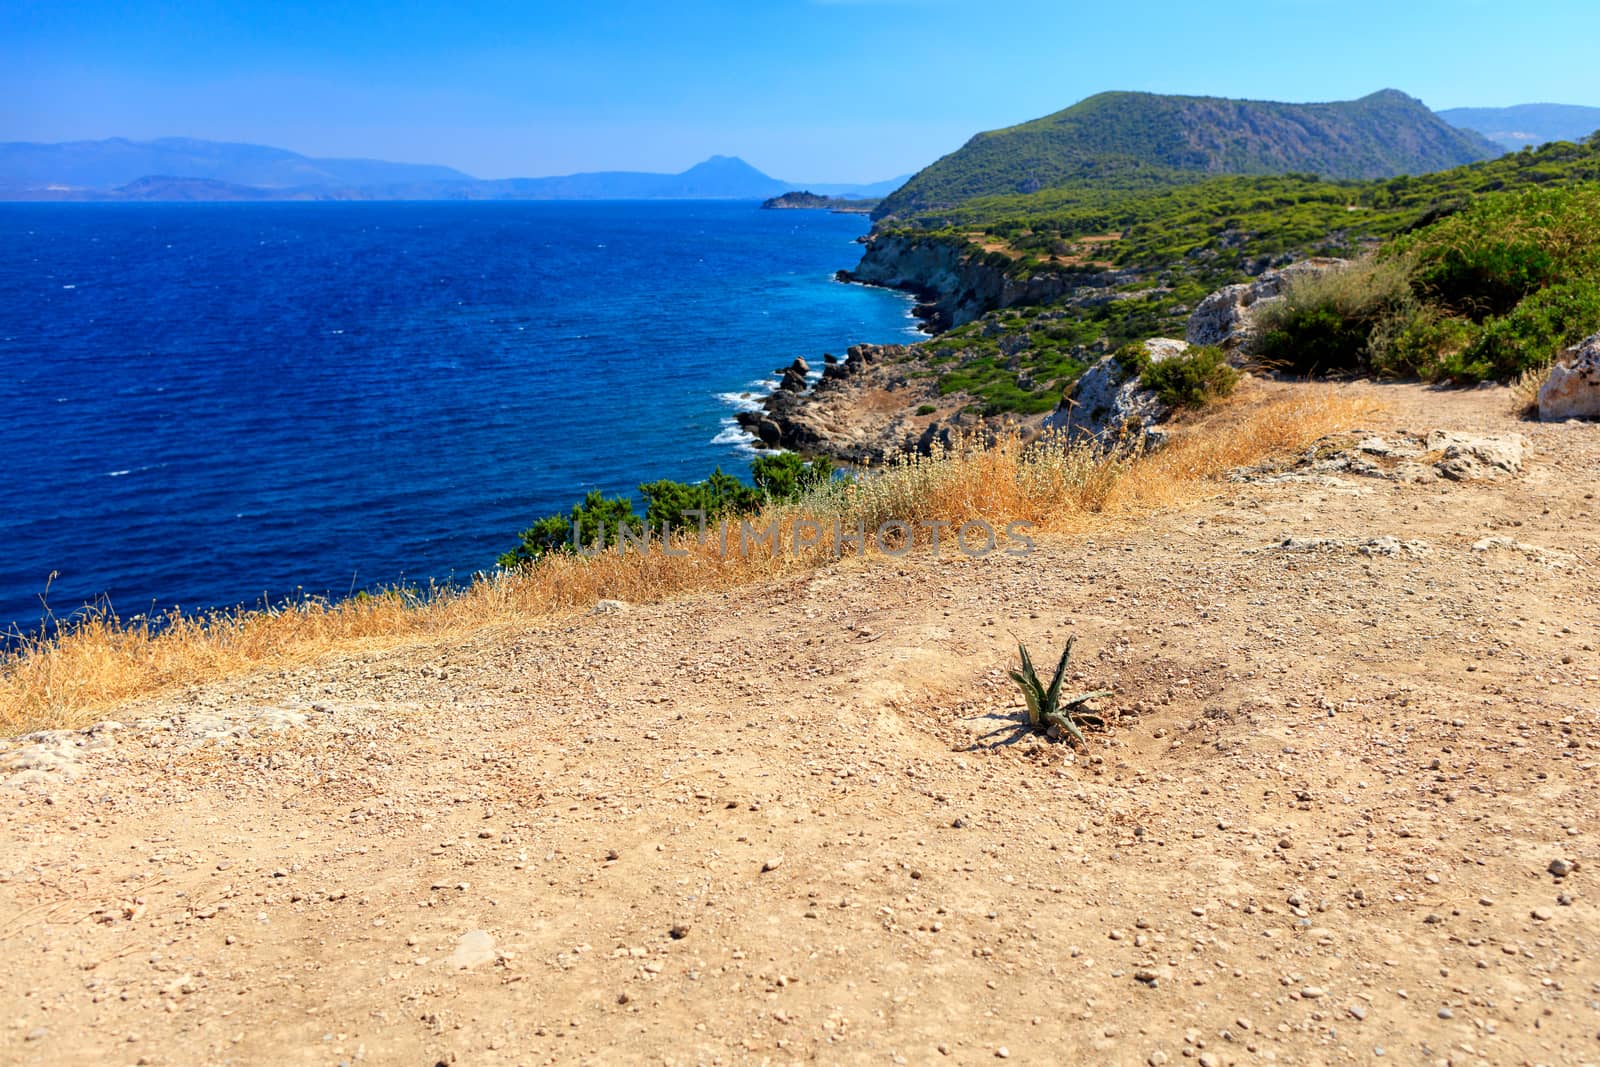 A prickly cactus has grown on a rocky soil road amid a blue lagoon on the coast of the Gulf of Corinth, image with copy space.